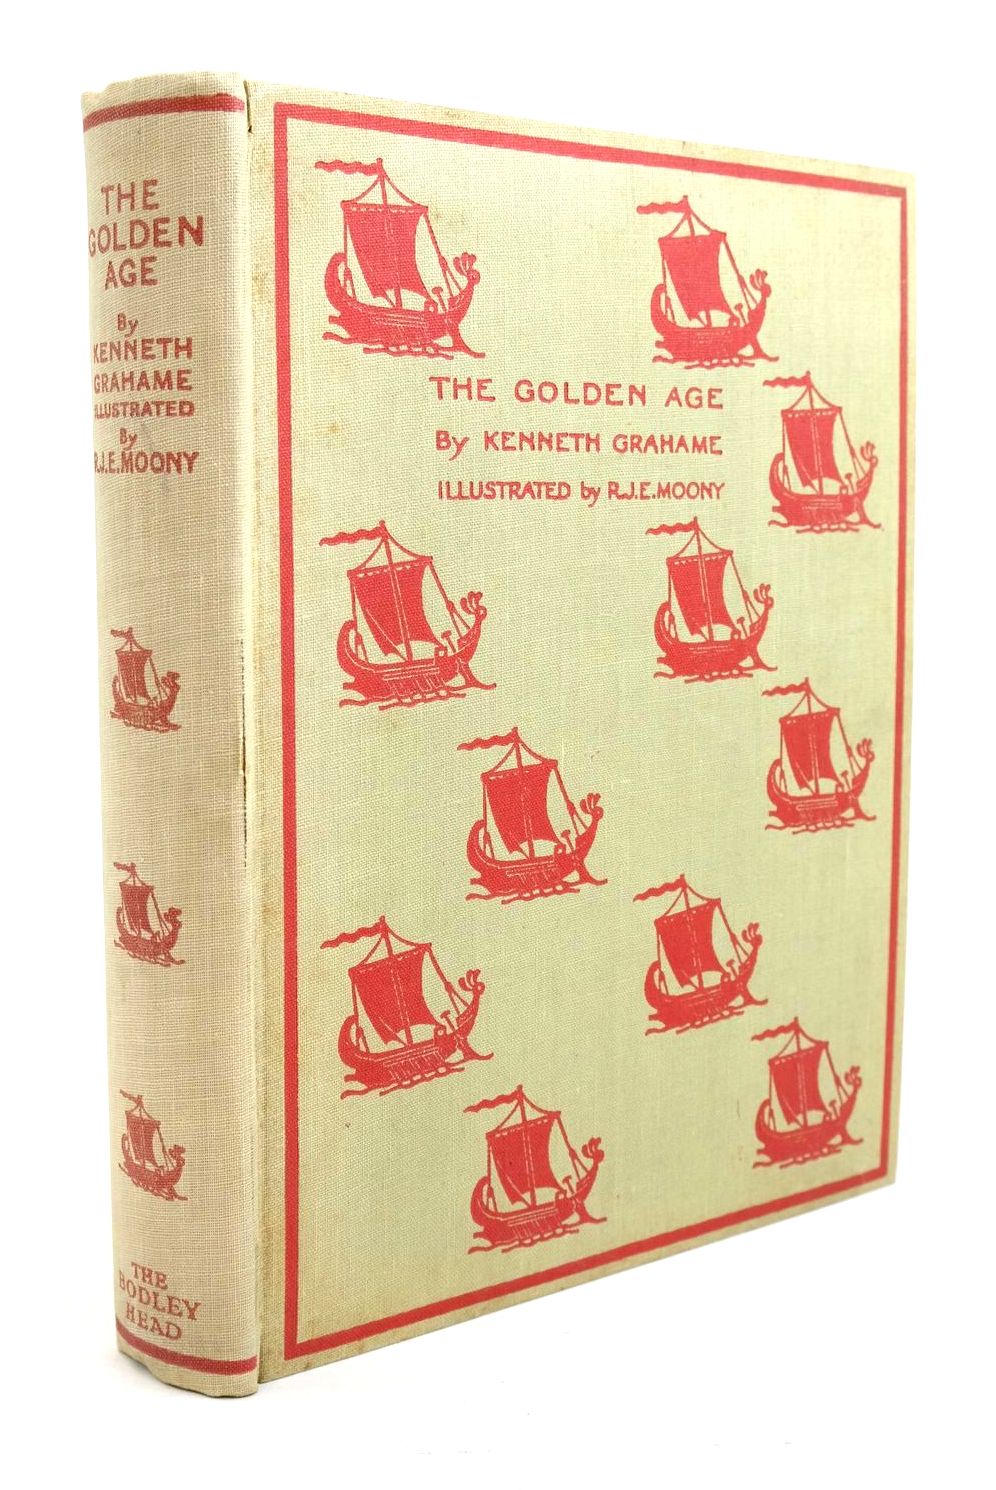 Photo of THE GOLDEN AGE written by Grahame, Kenneth illustrated by Enraght-Moony, R.J. published by John Lane The Bodley Head (STOCK CODE: 1320880)  for sale by Stella & Rose's Books